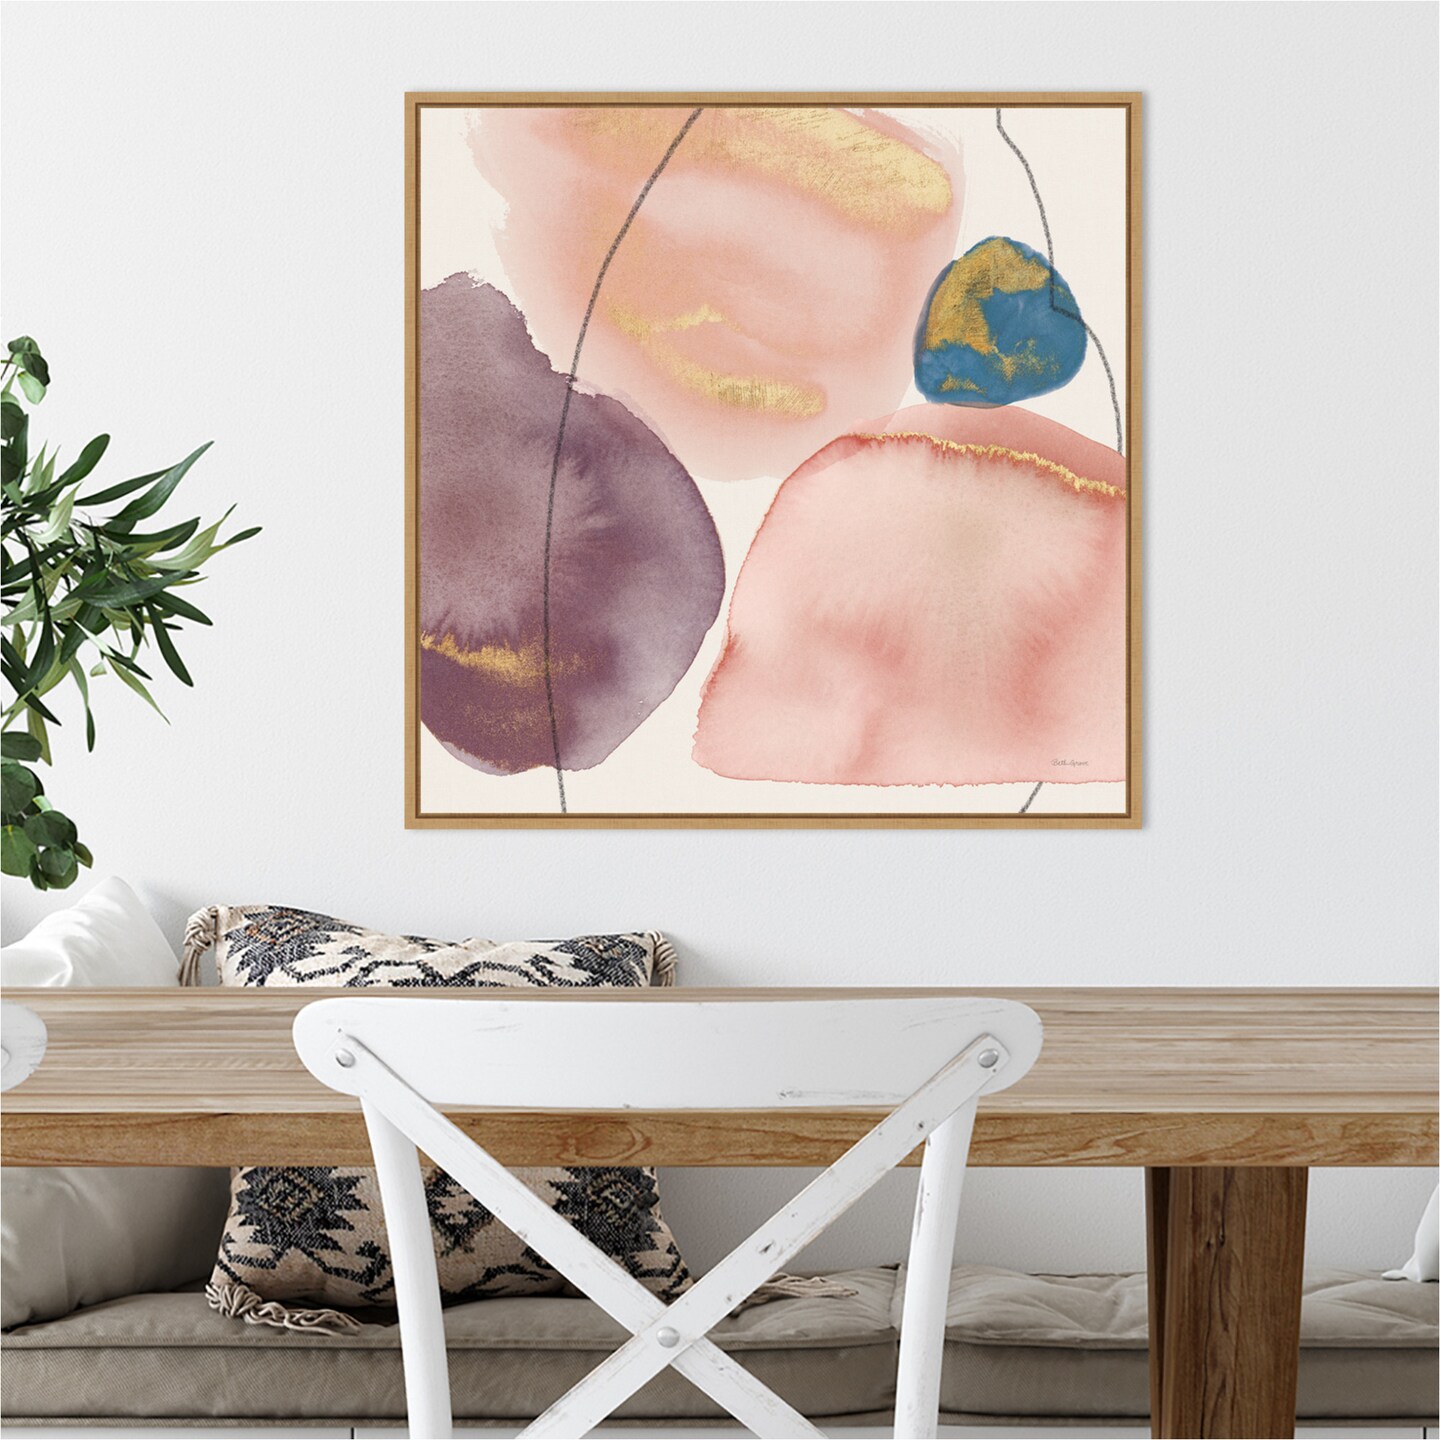 Petal Passion XI Eventide by Beth Grove 22-in. W x 22-in. H. Canvas Wall Art Print Framed in Natural